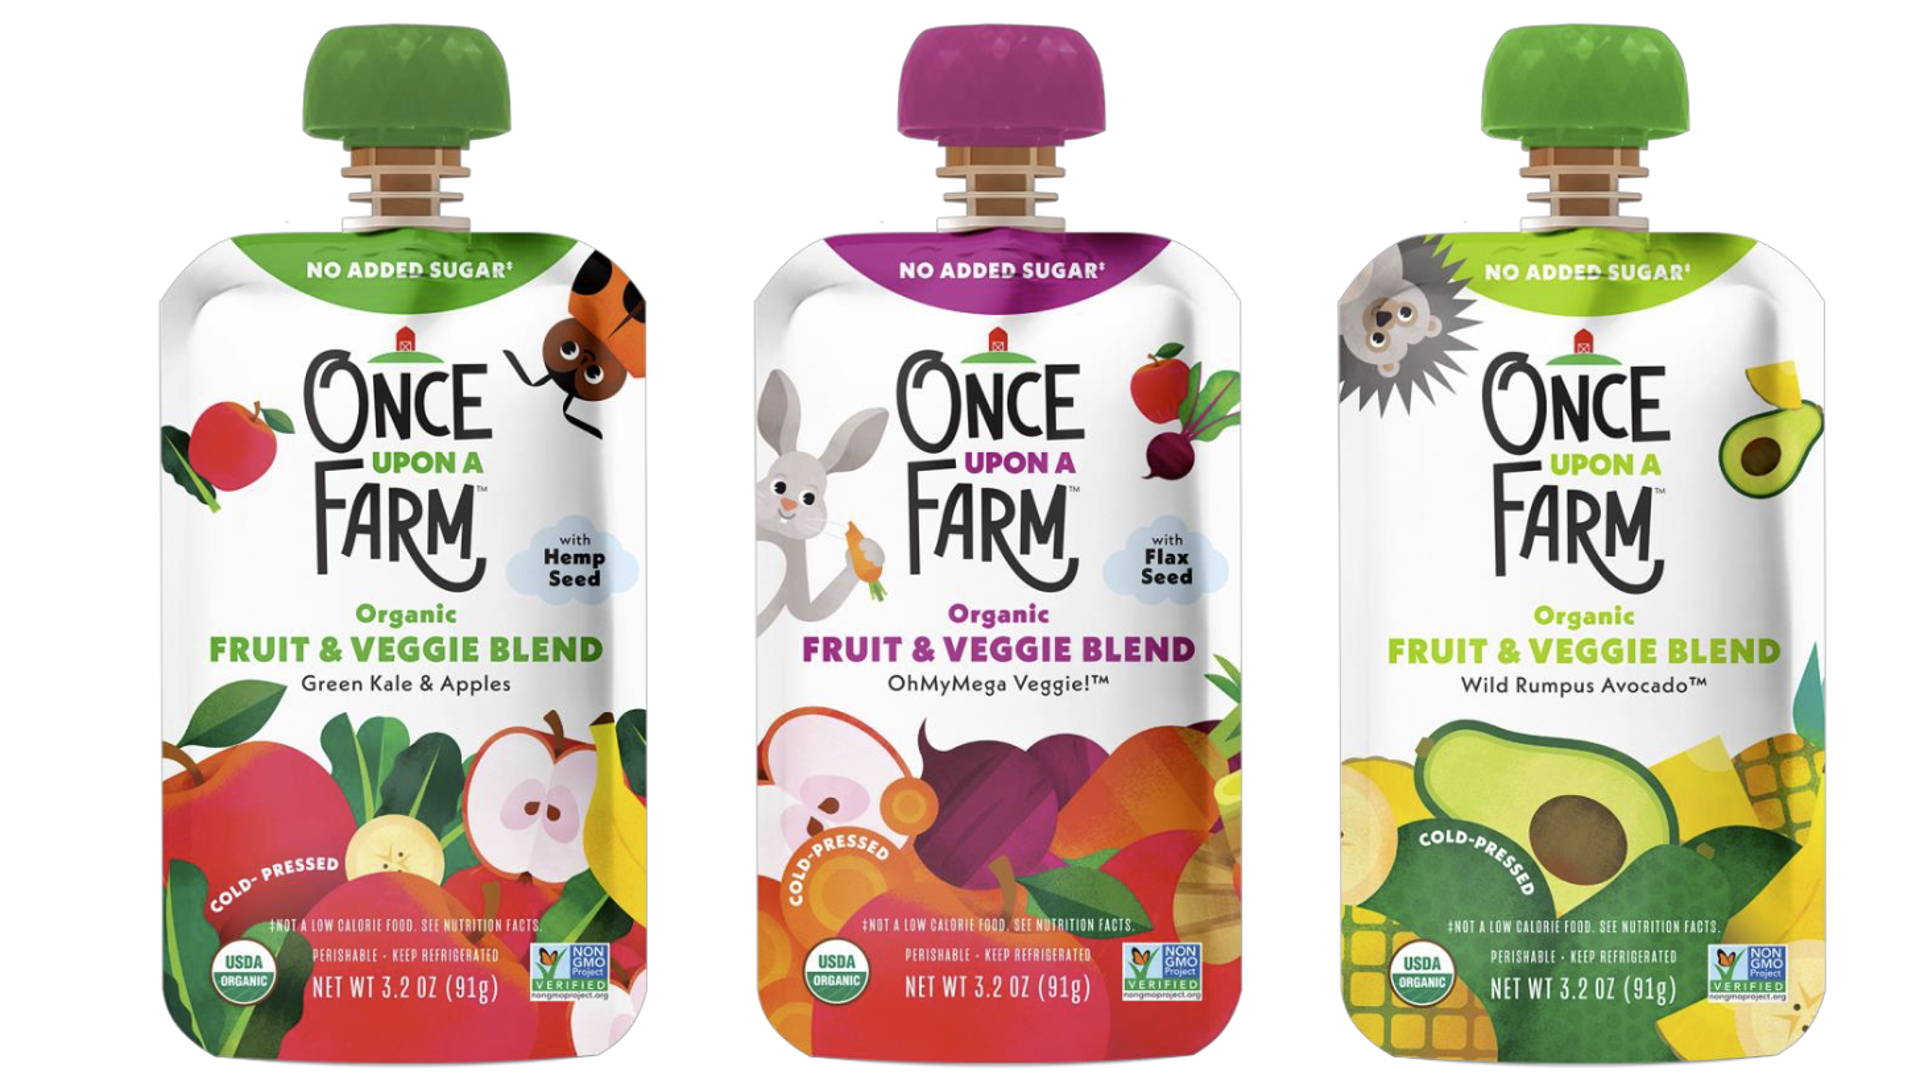 Once Upon a Farm Is A Leader In The Kid's Nutrition Space | Dieline ...